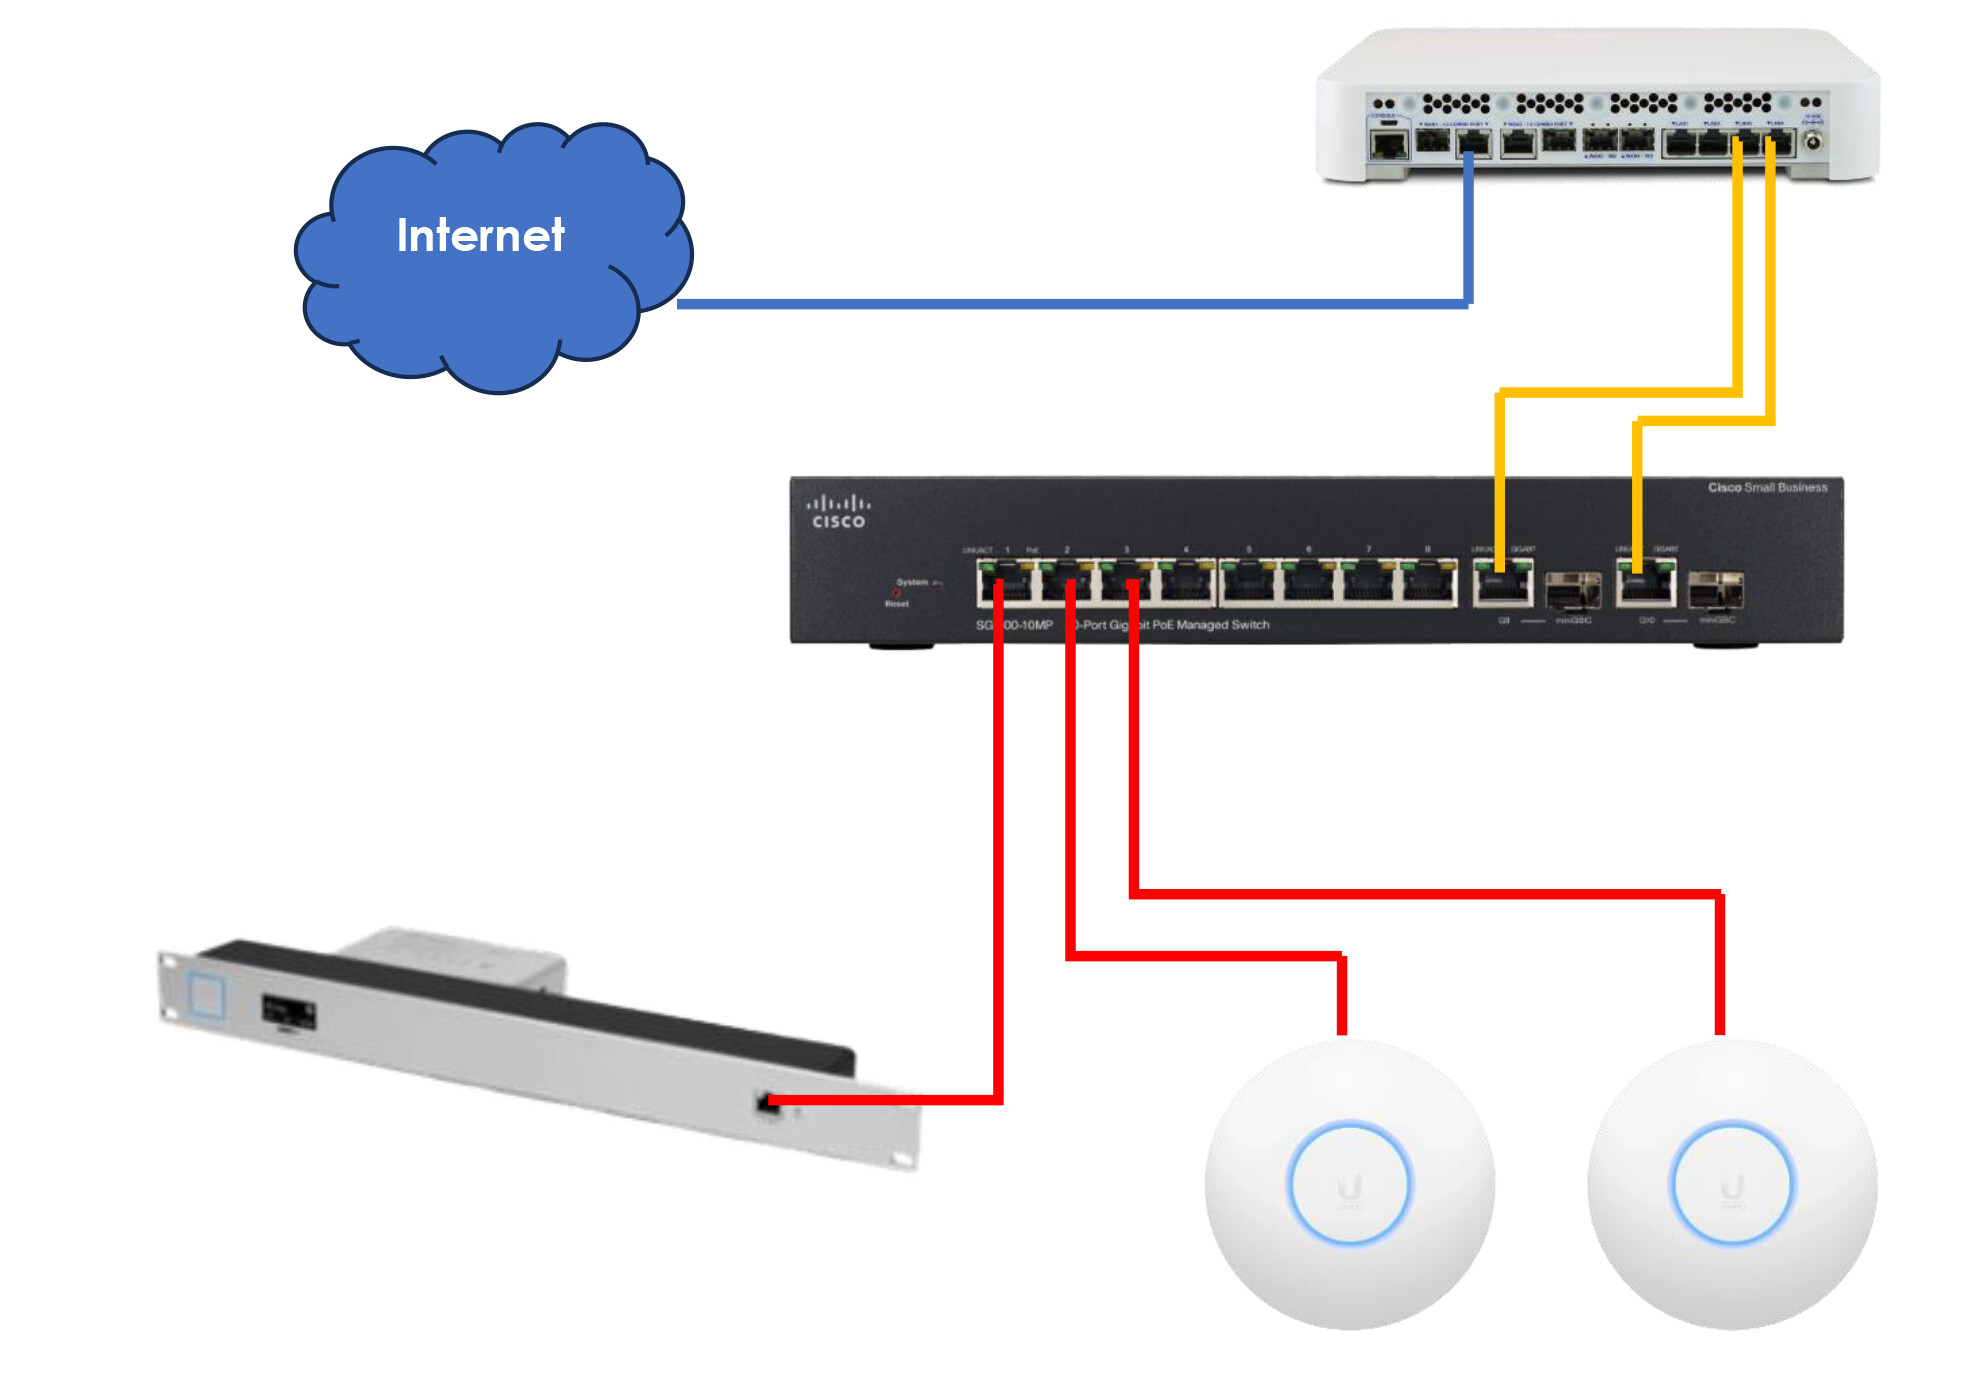 What is happening? - VLANs not working on UniFi Switch-8 via